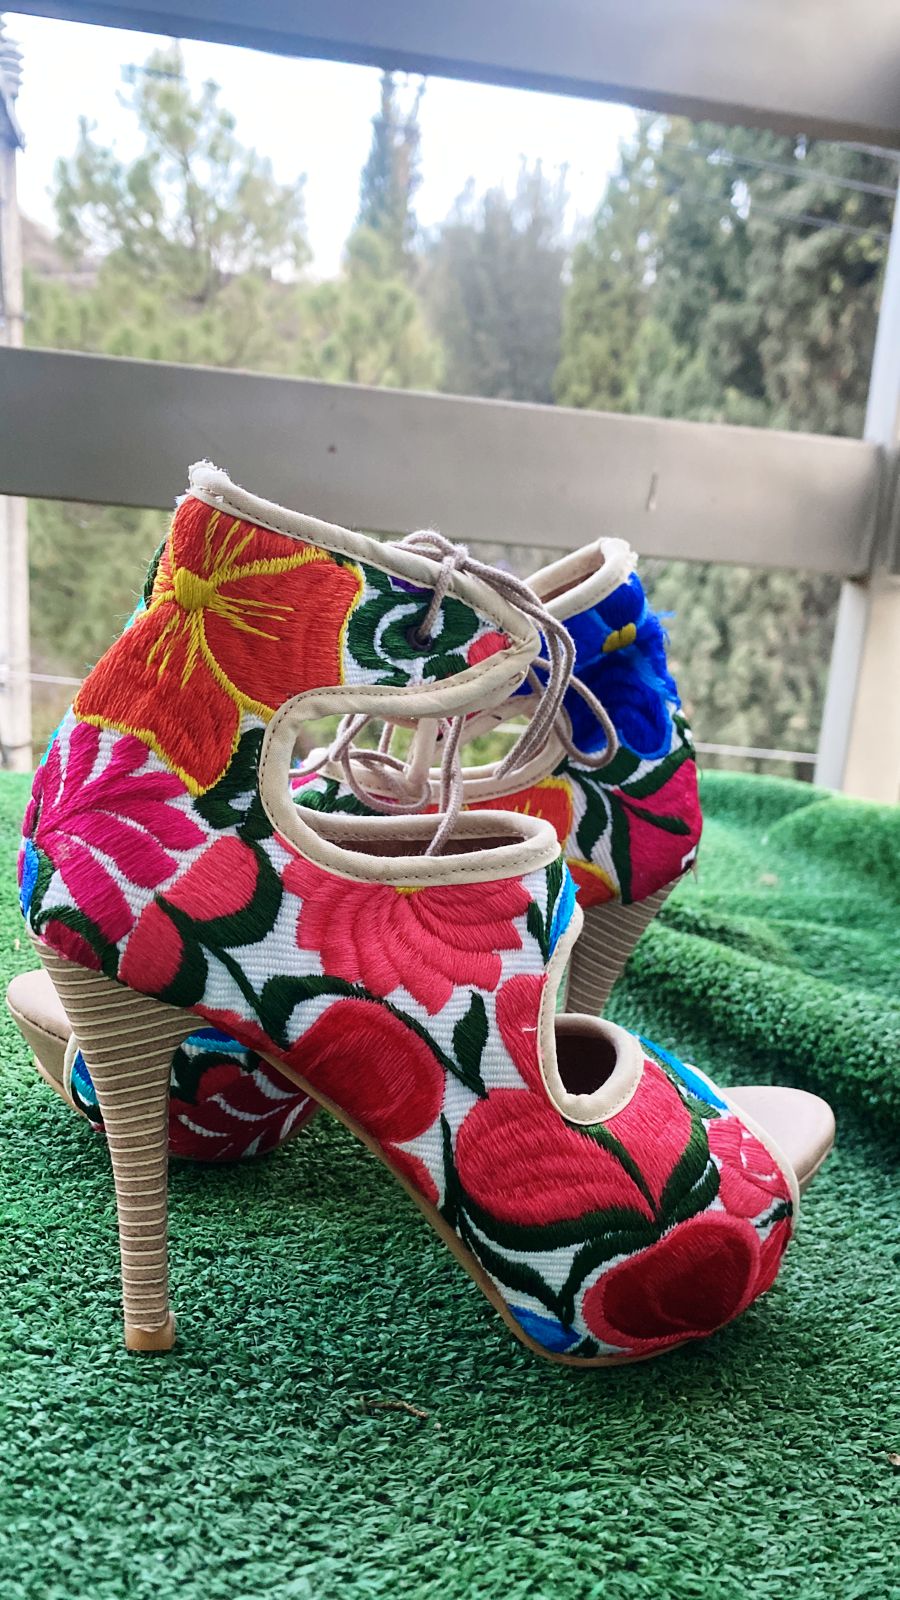 High heels with blue, red and yellow floral embroidery. The heels are on grass and there is a balcony behind them.